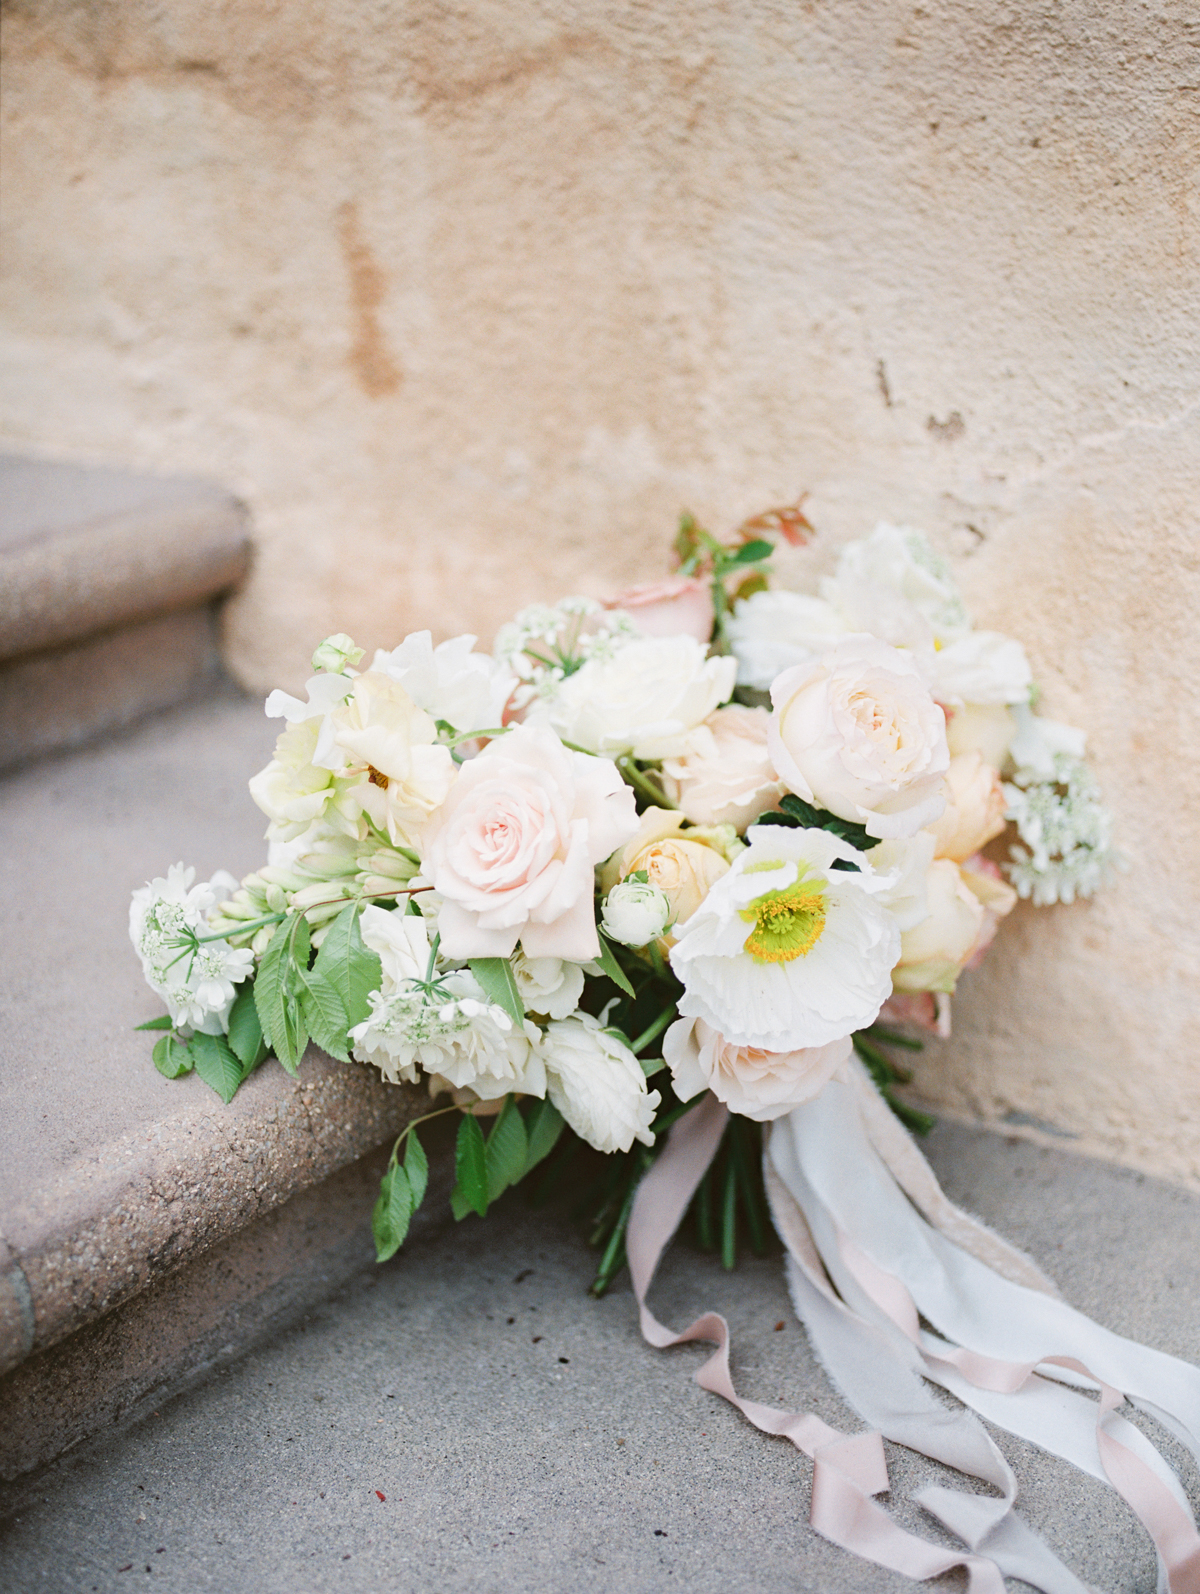 Romantic and airy wedding bouquet